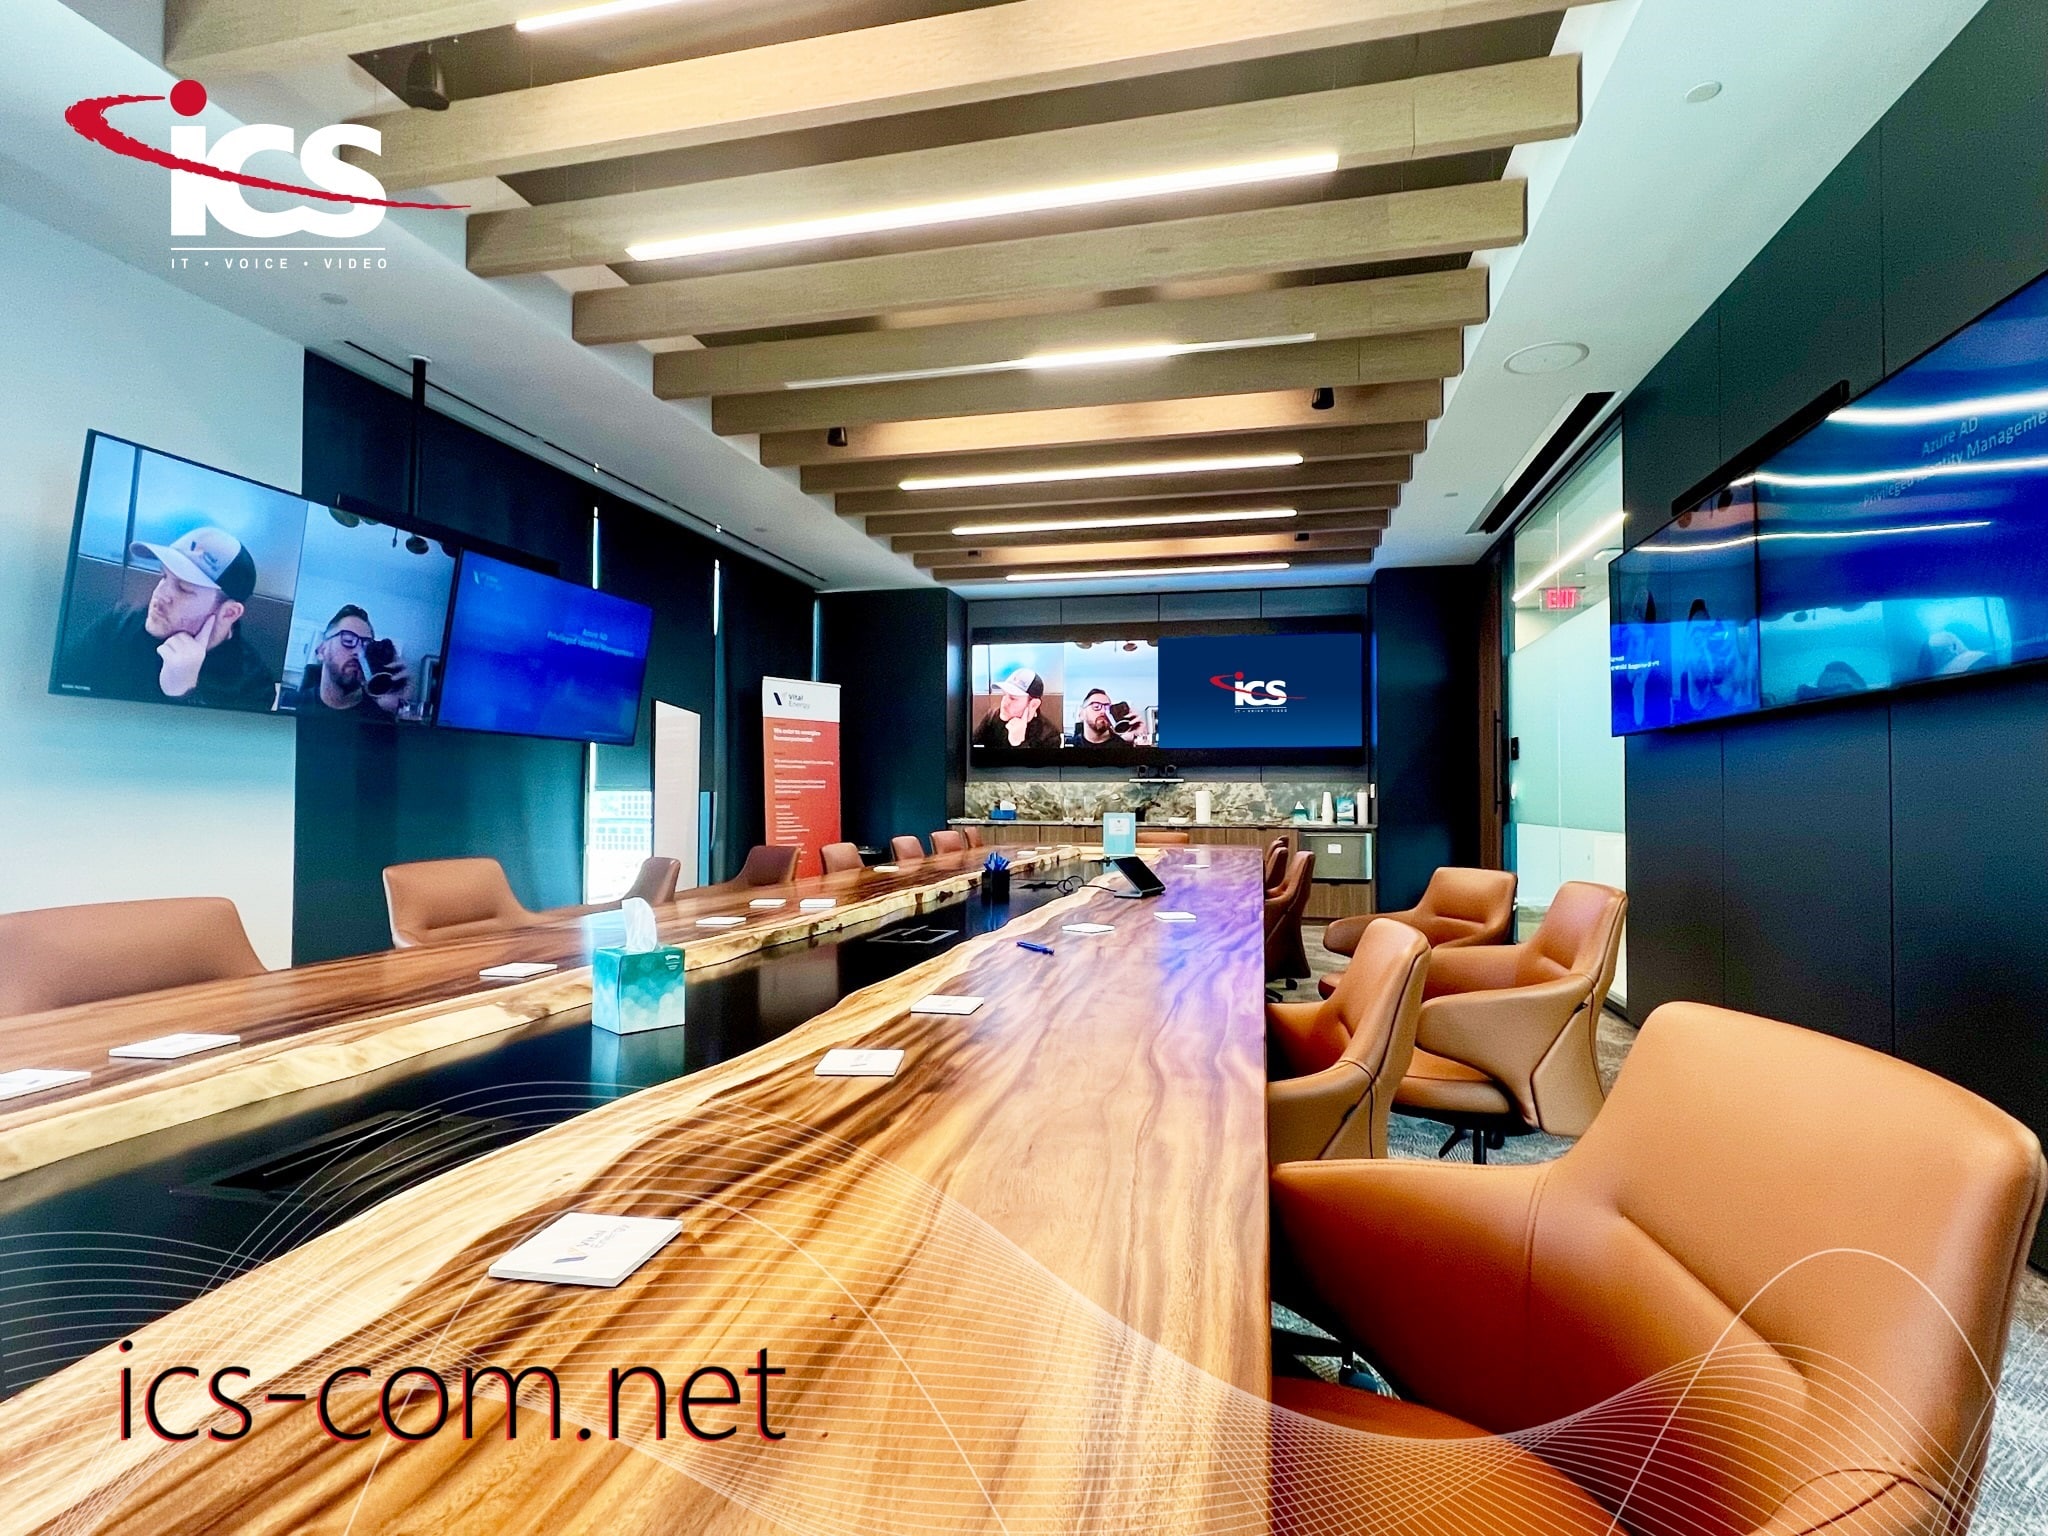 ICS Transforms Client’s Conference Spaces To Enhance Collaboration and Communication